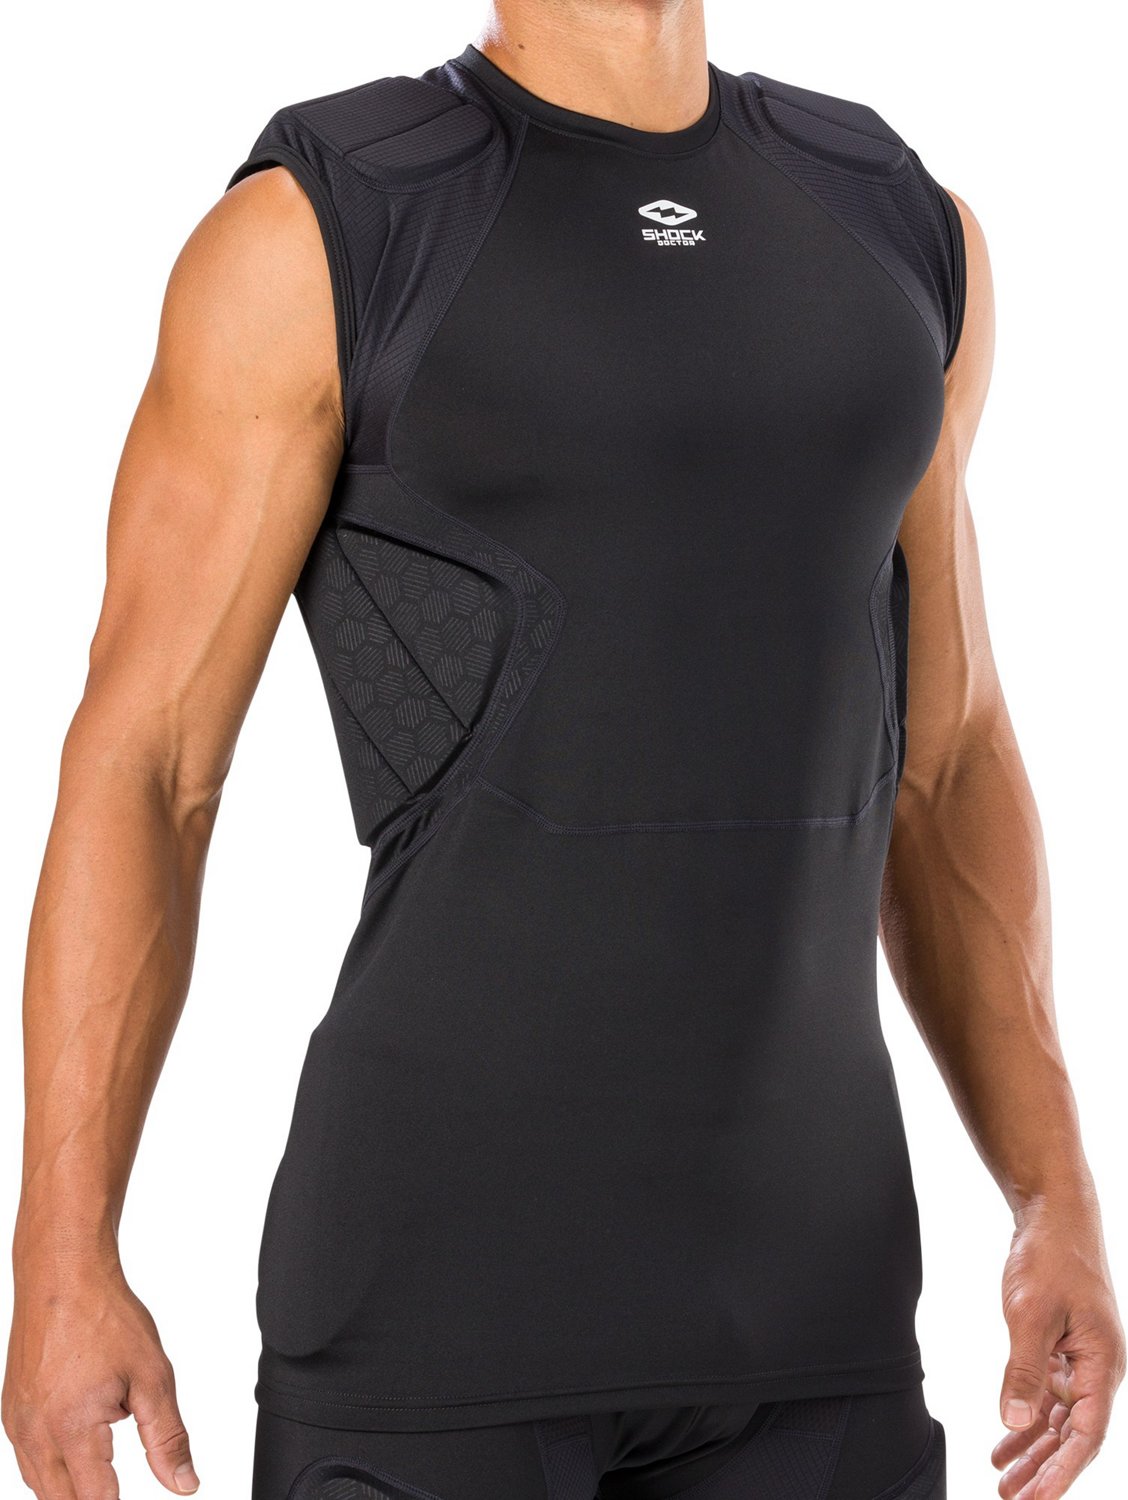  Men's Padded Compression Shirt Sports Protective Vest Rash  Guard Basketball Training Tank Top M : Sports & Outdoors